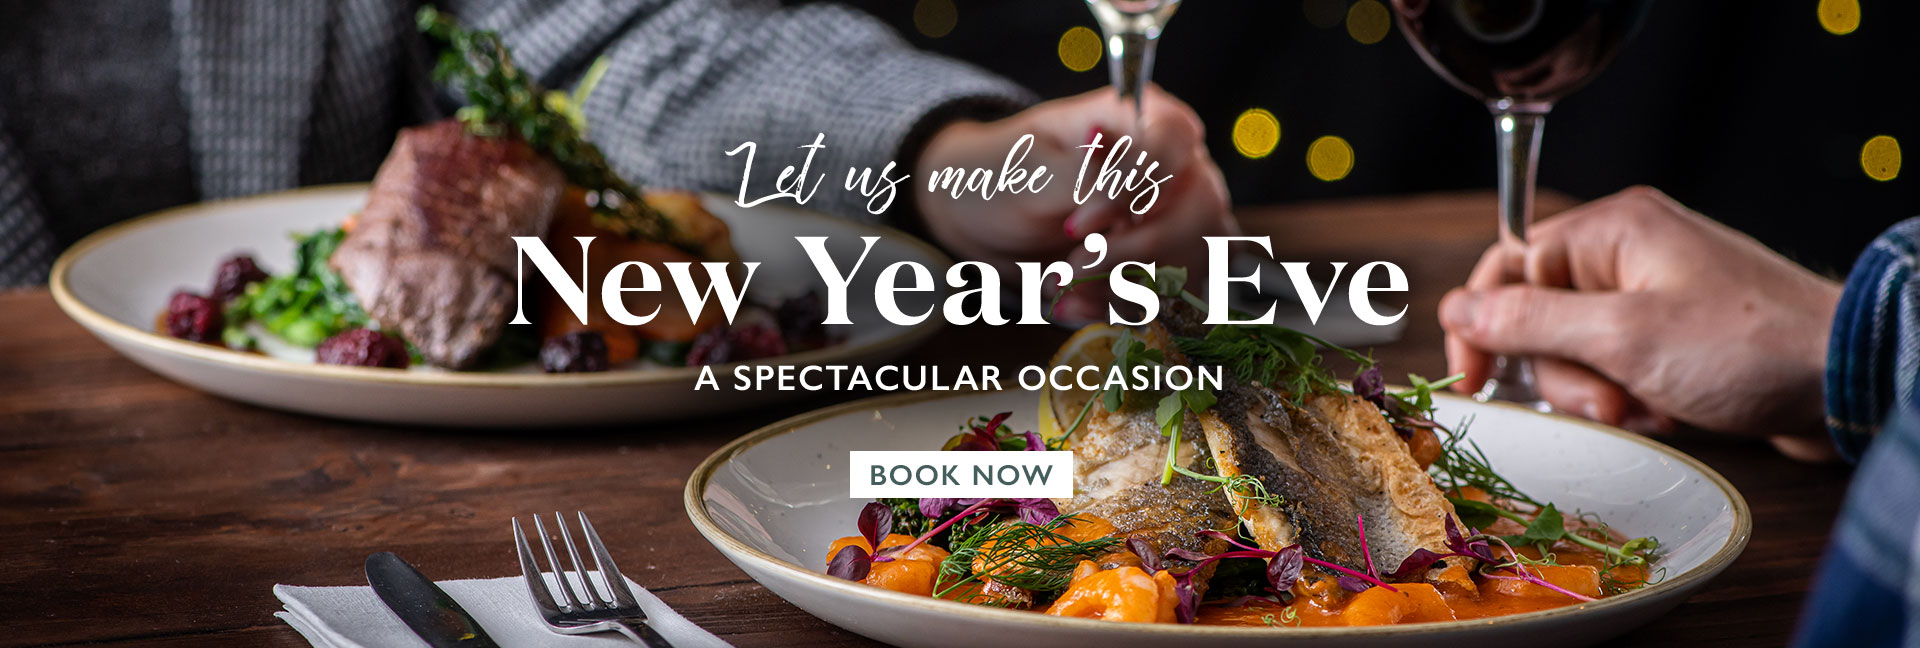 New Year’s Eve Menu at The Crown, Ardleigh 